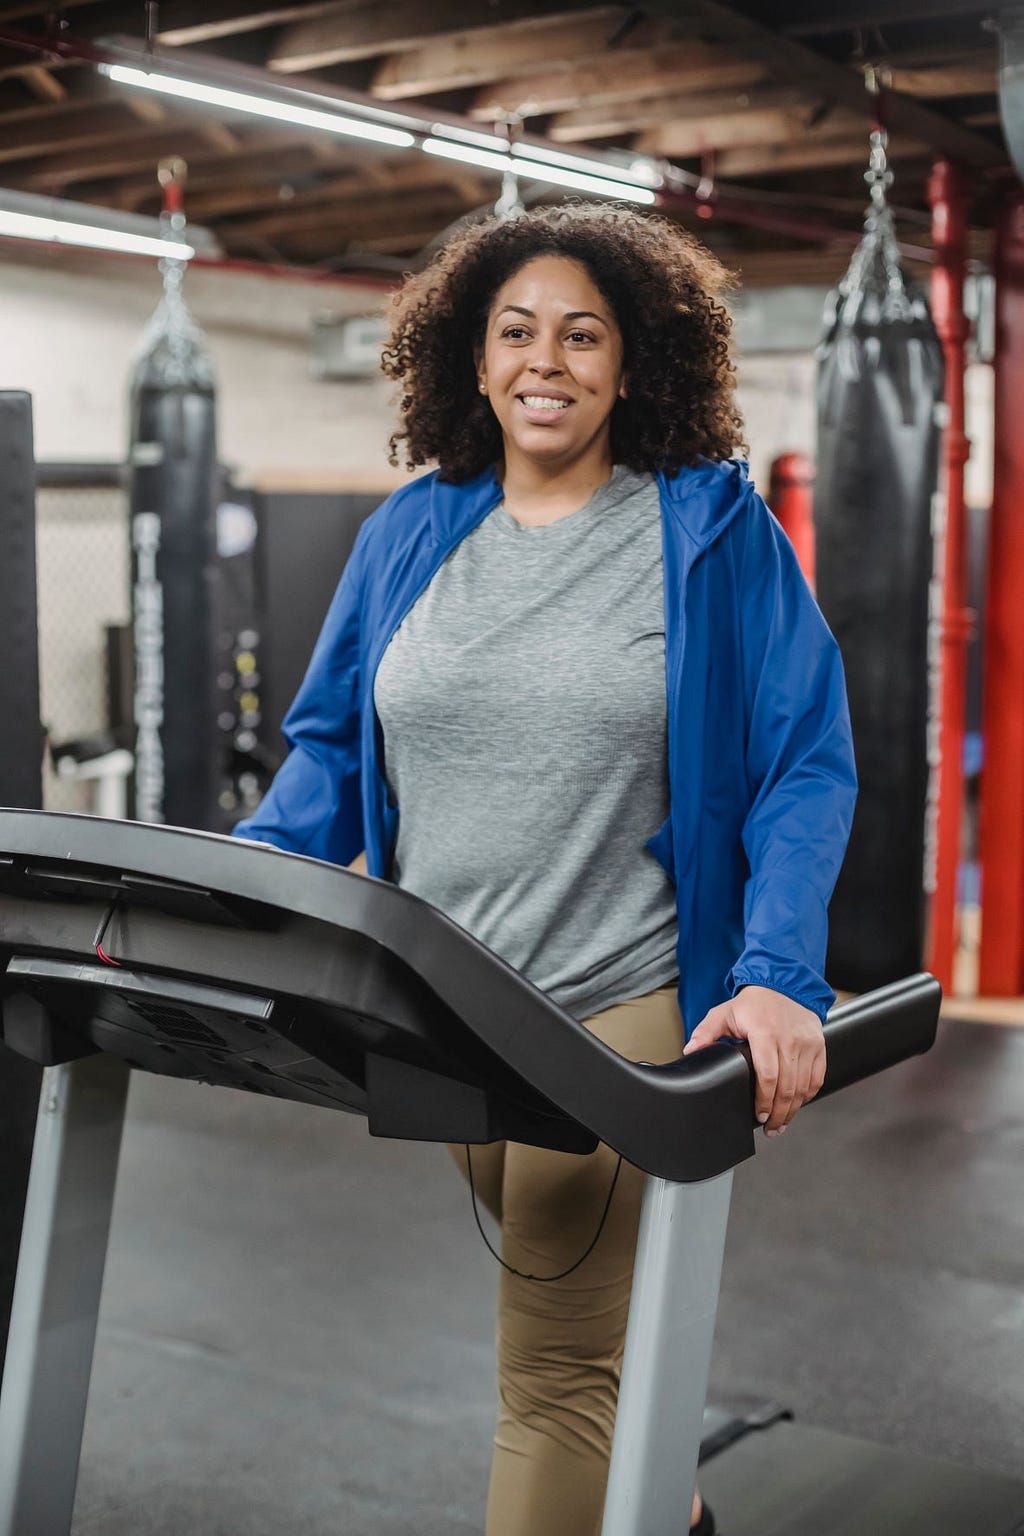 Photo of a woman walking on an indoor treadmill and smiling